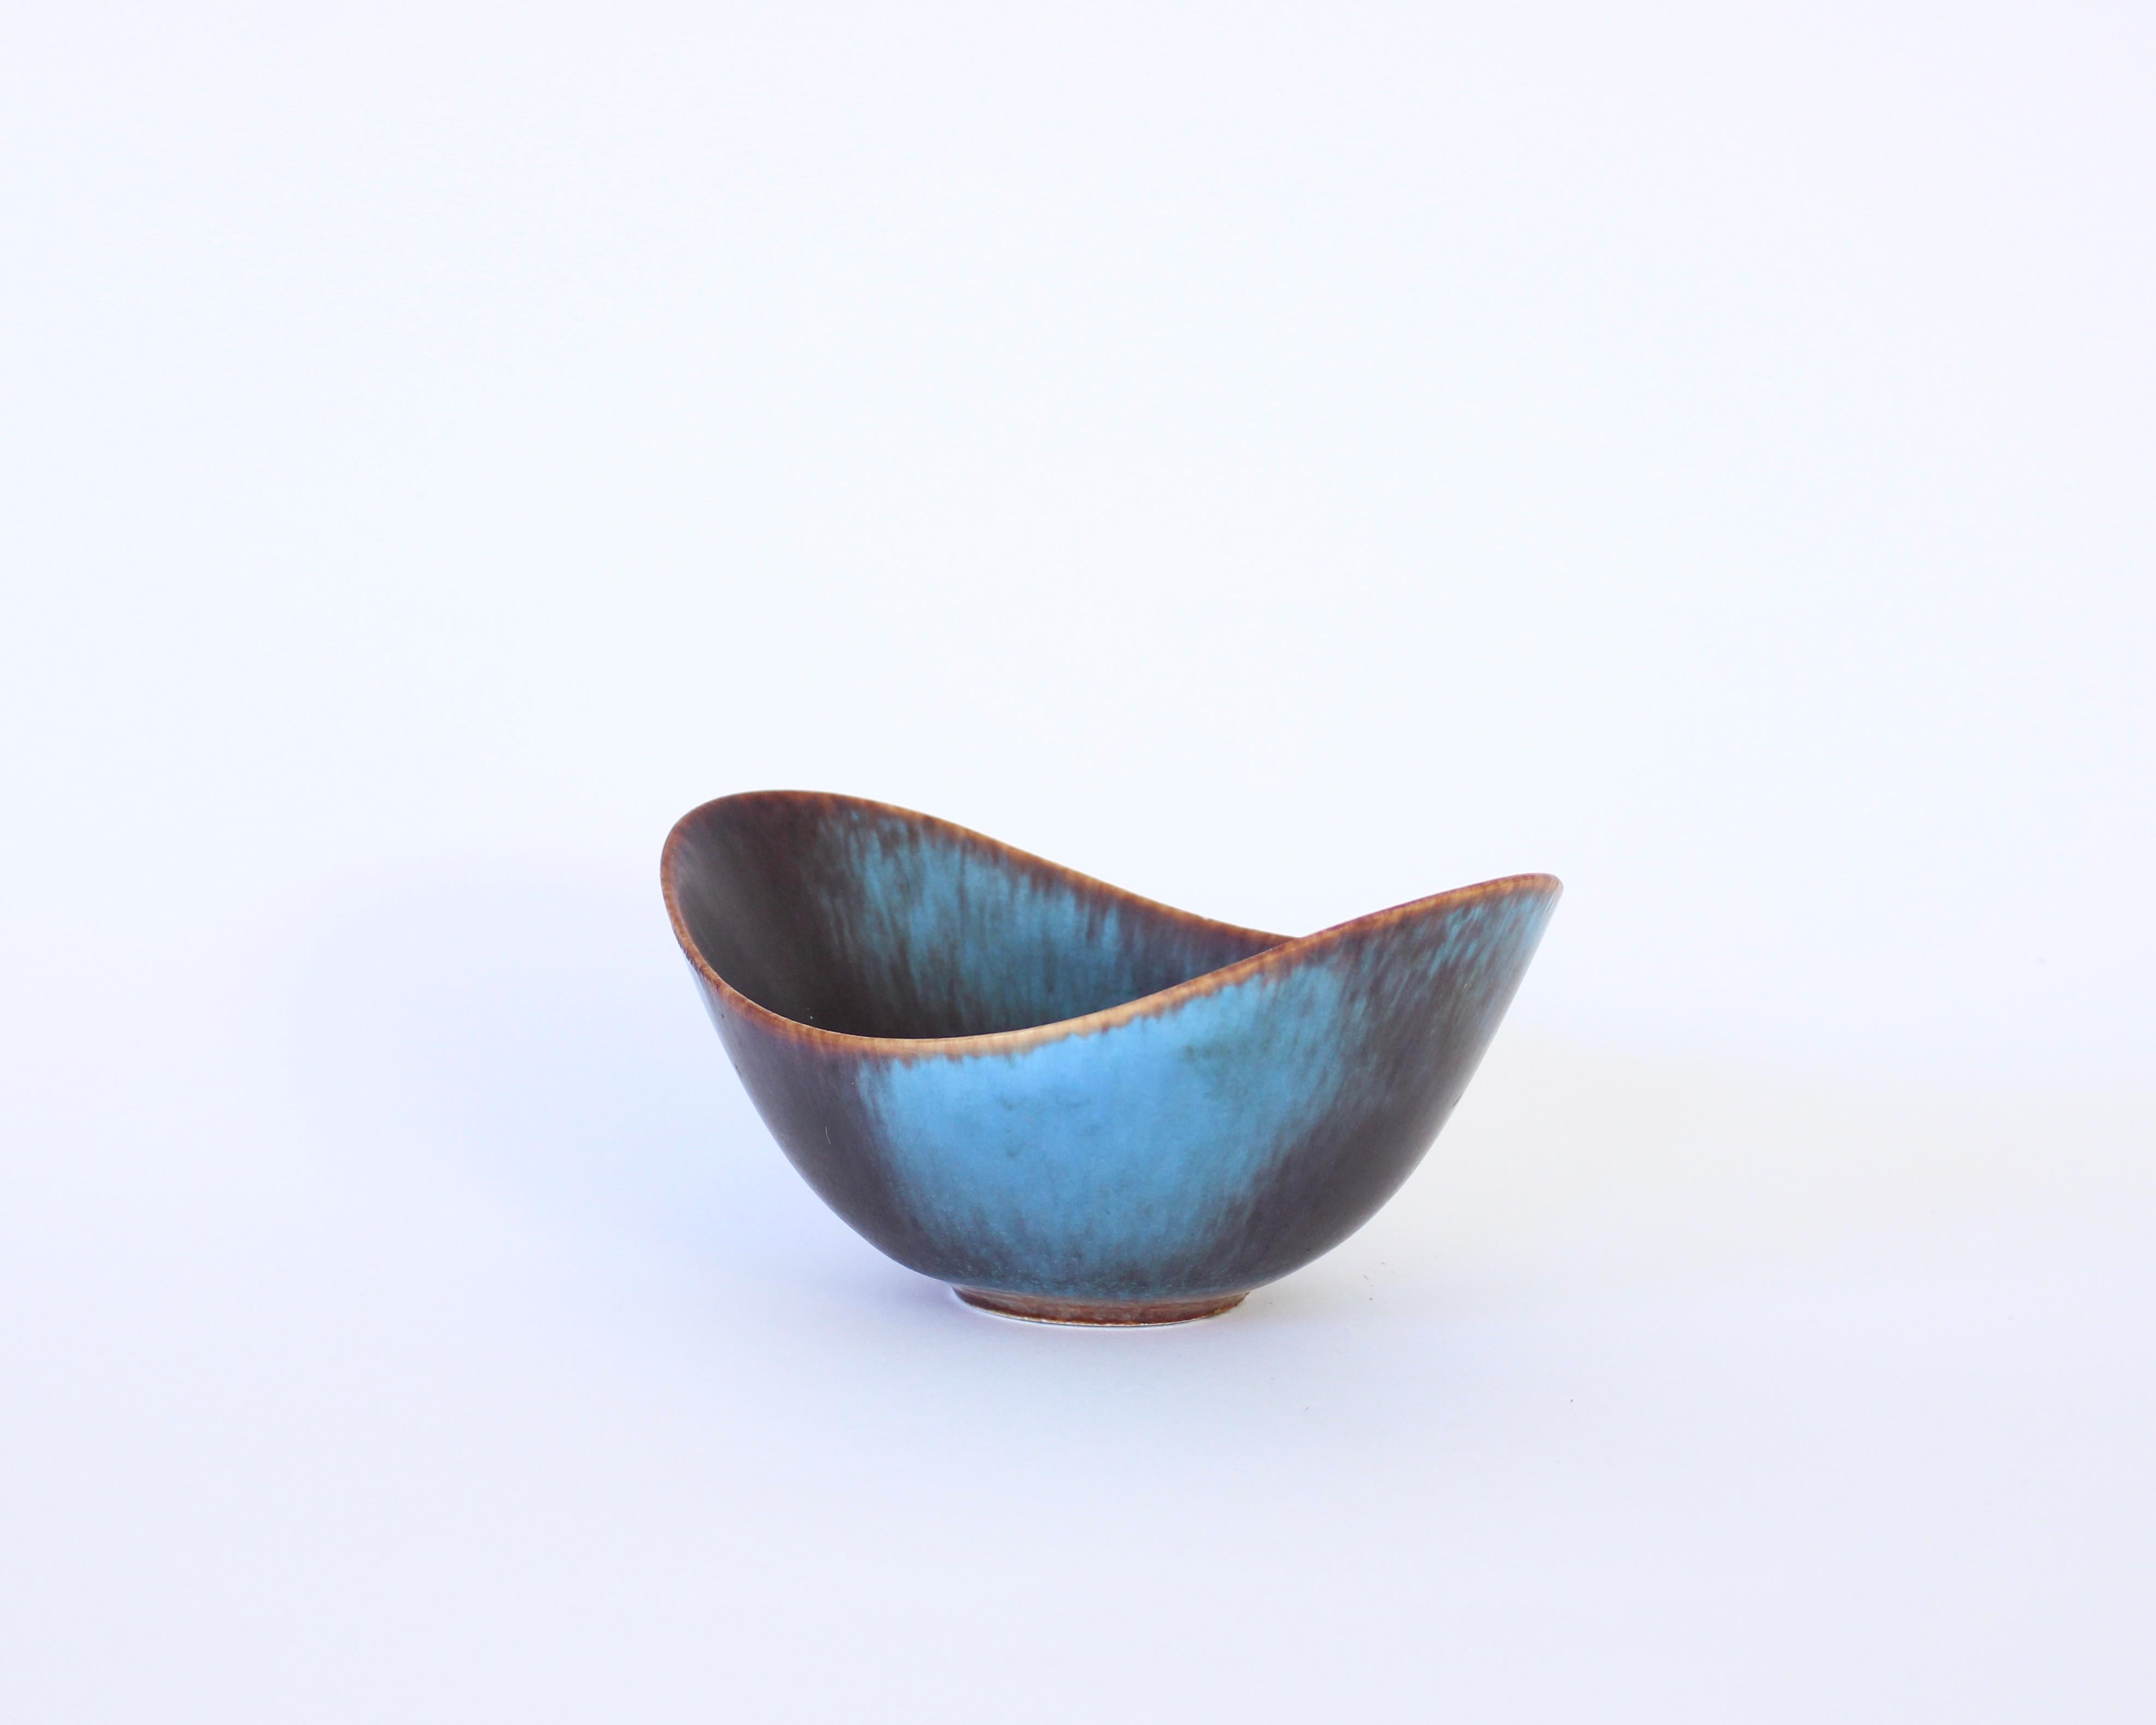 Medium size ARO bowl created and designed by Gunnar Nylund at the Rörstrand Factory in the 1950s, Sweden.
Blue hares fur glaze breaking to browns. Excellent condition. No chips.